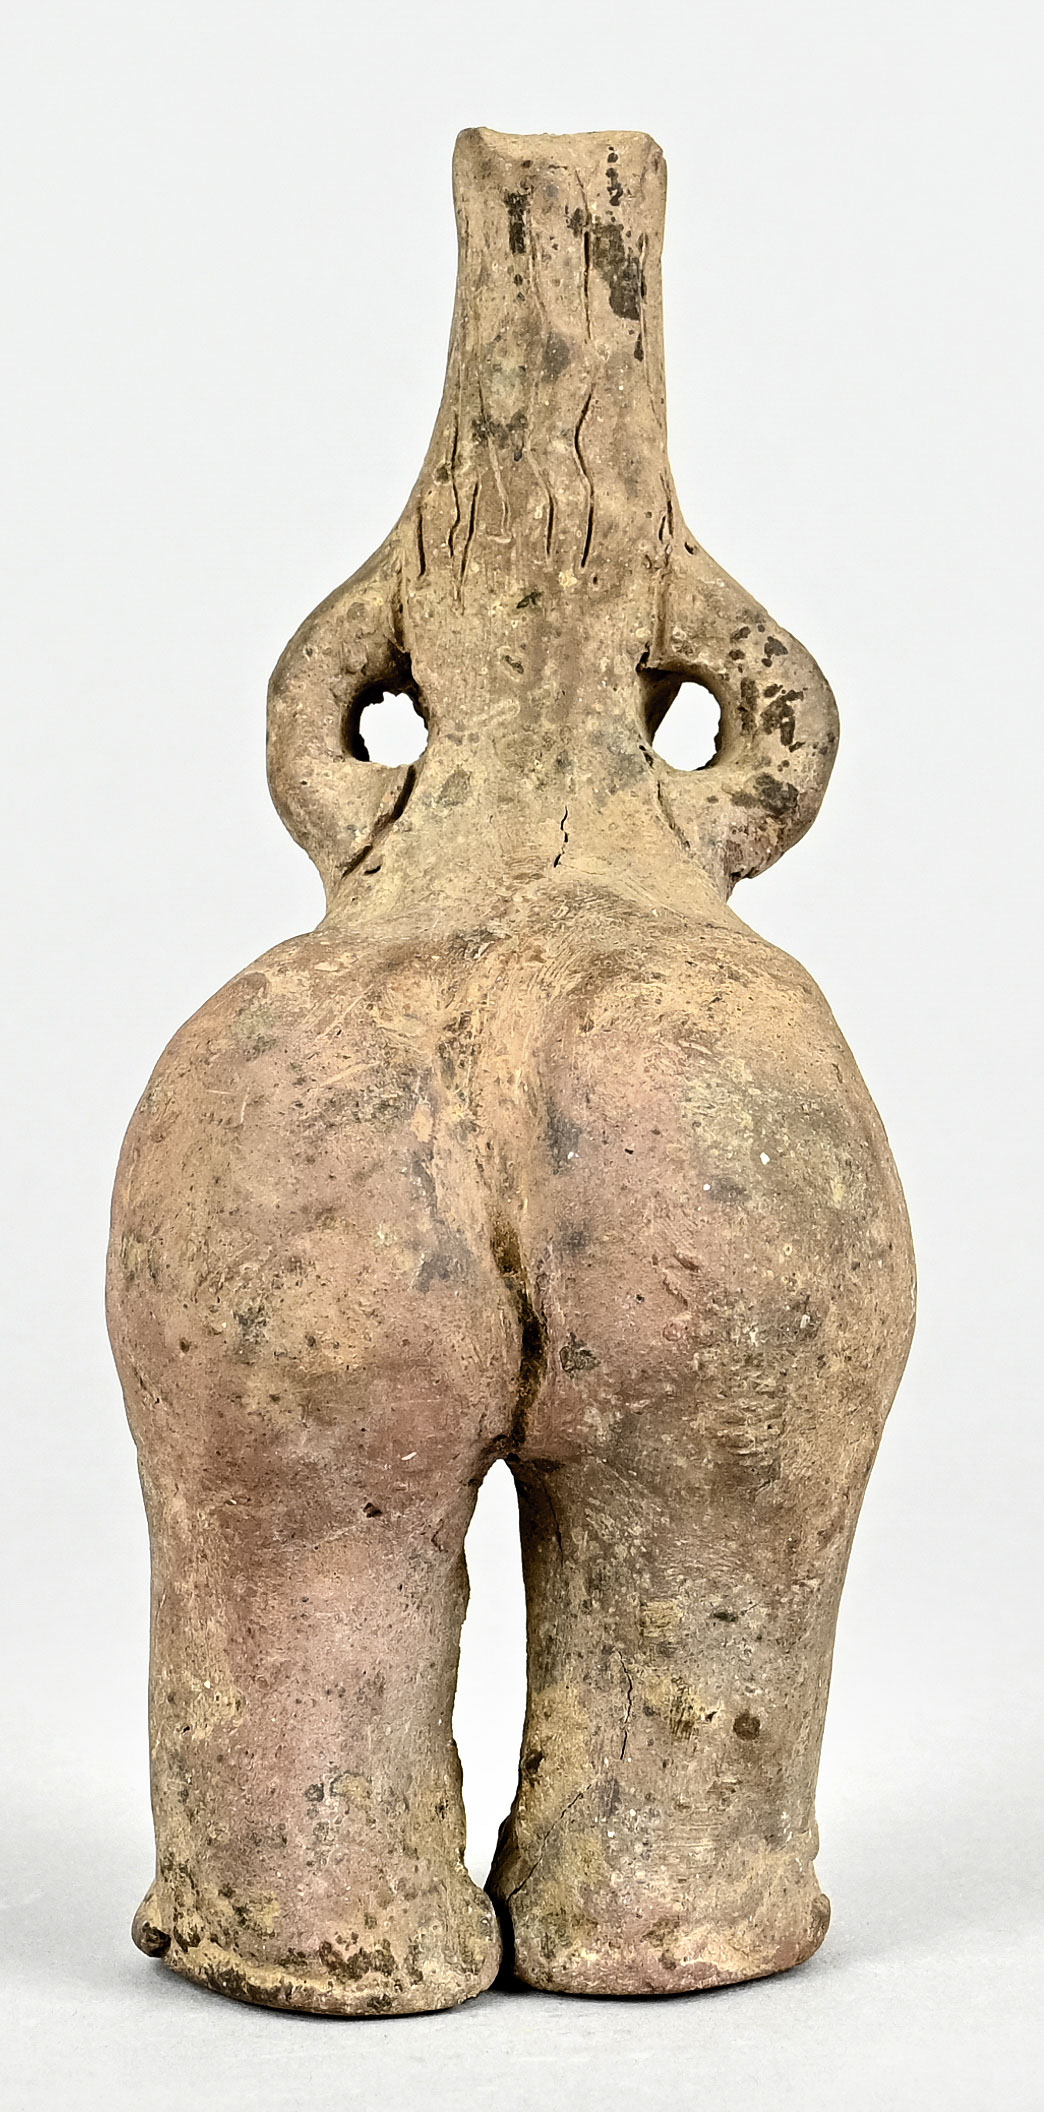 Modern female figure, Middle East, terracotta, arms resting on the abdomen, female attributes and l - Image 2 of 3